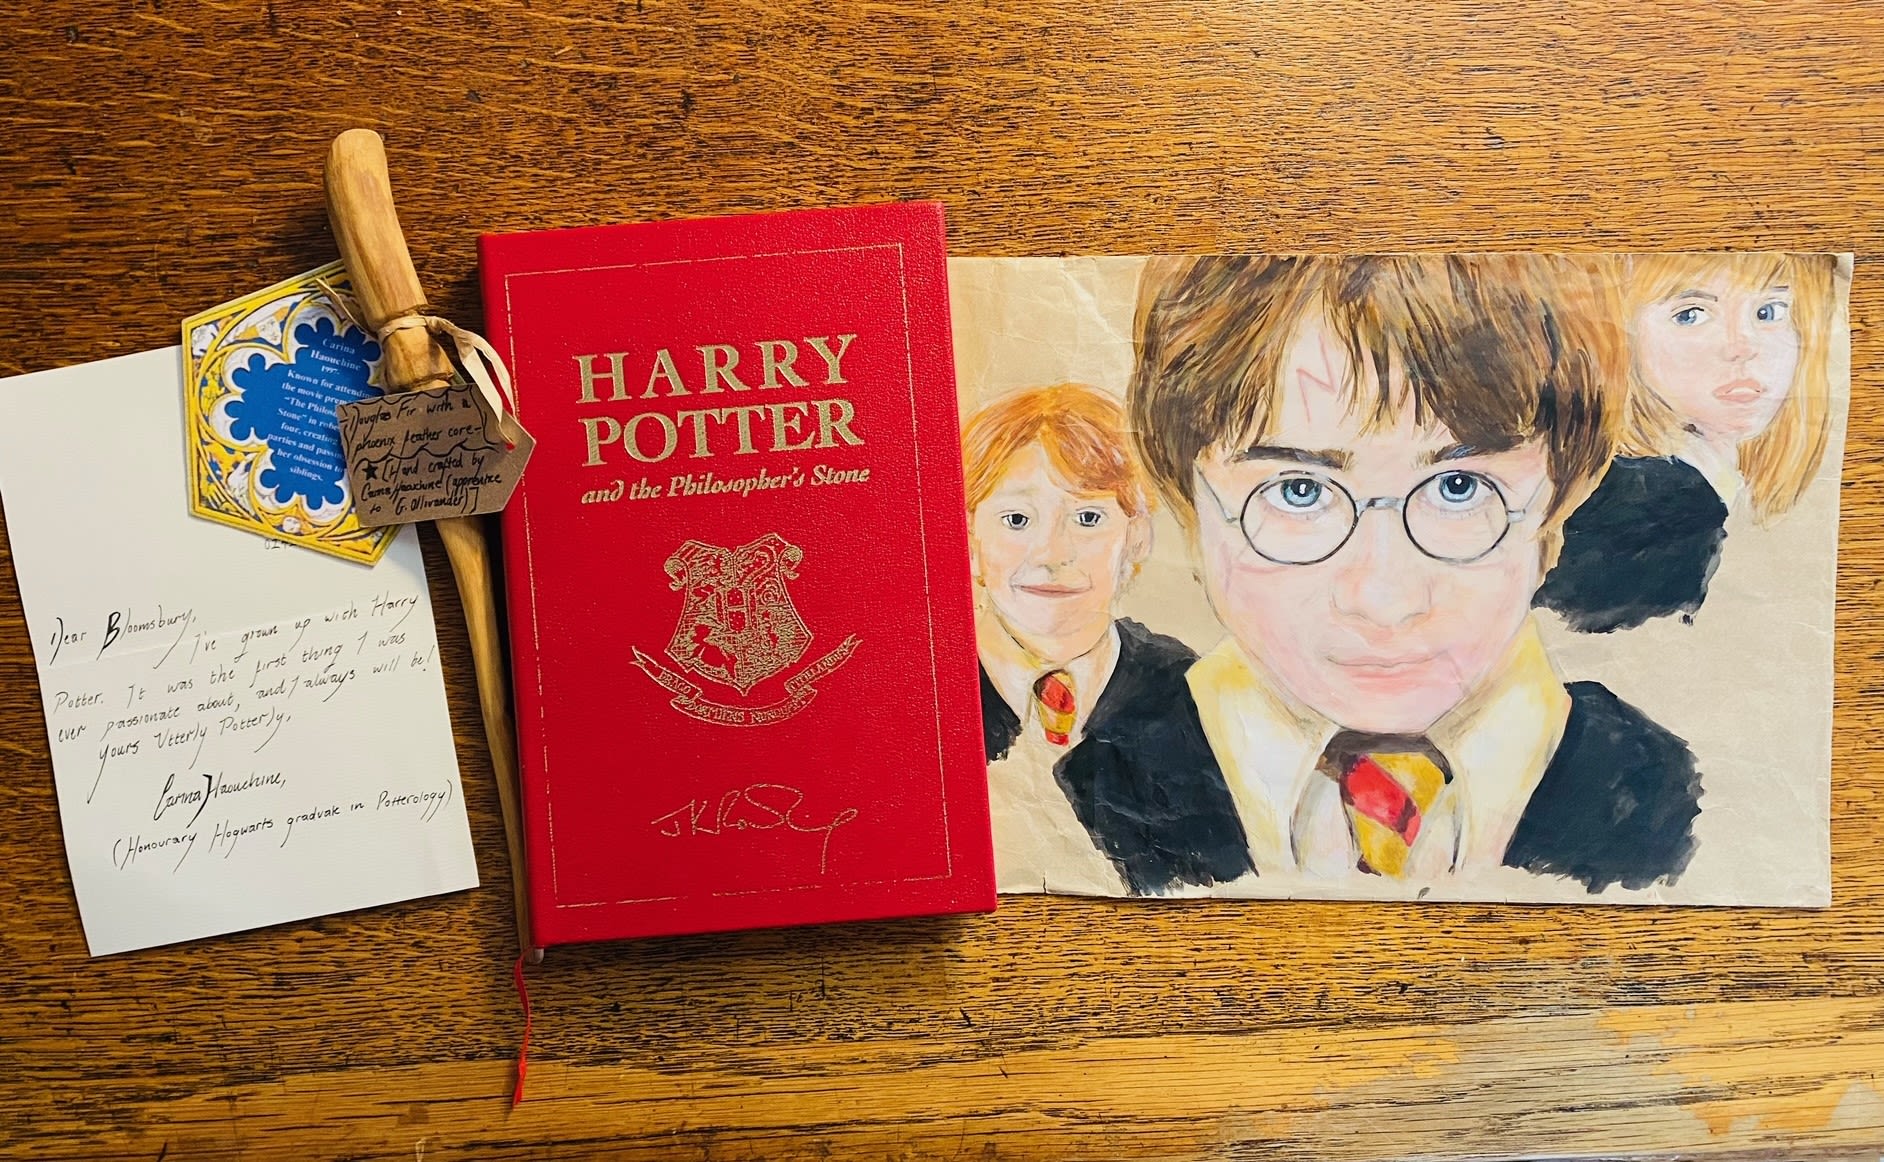 A rare Harry Potter book that once survived a fire could fetch thousands at  upcoming auction